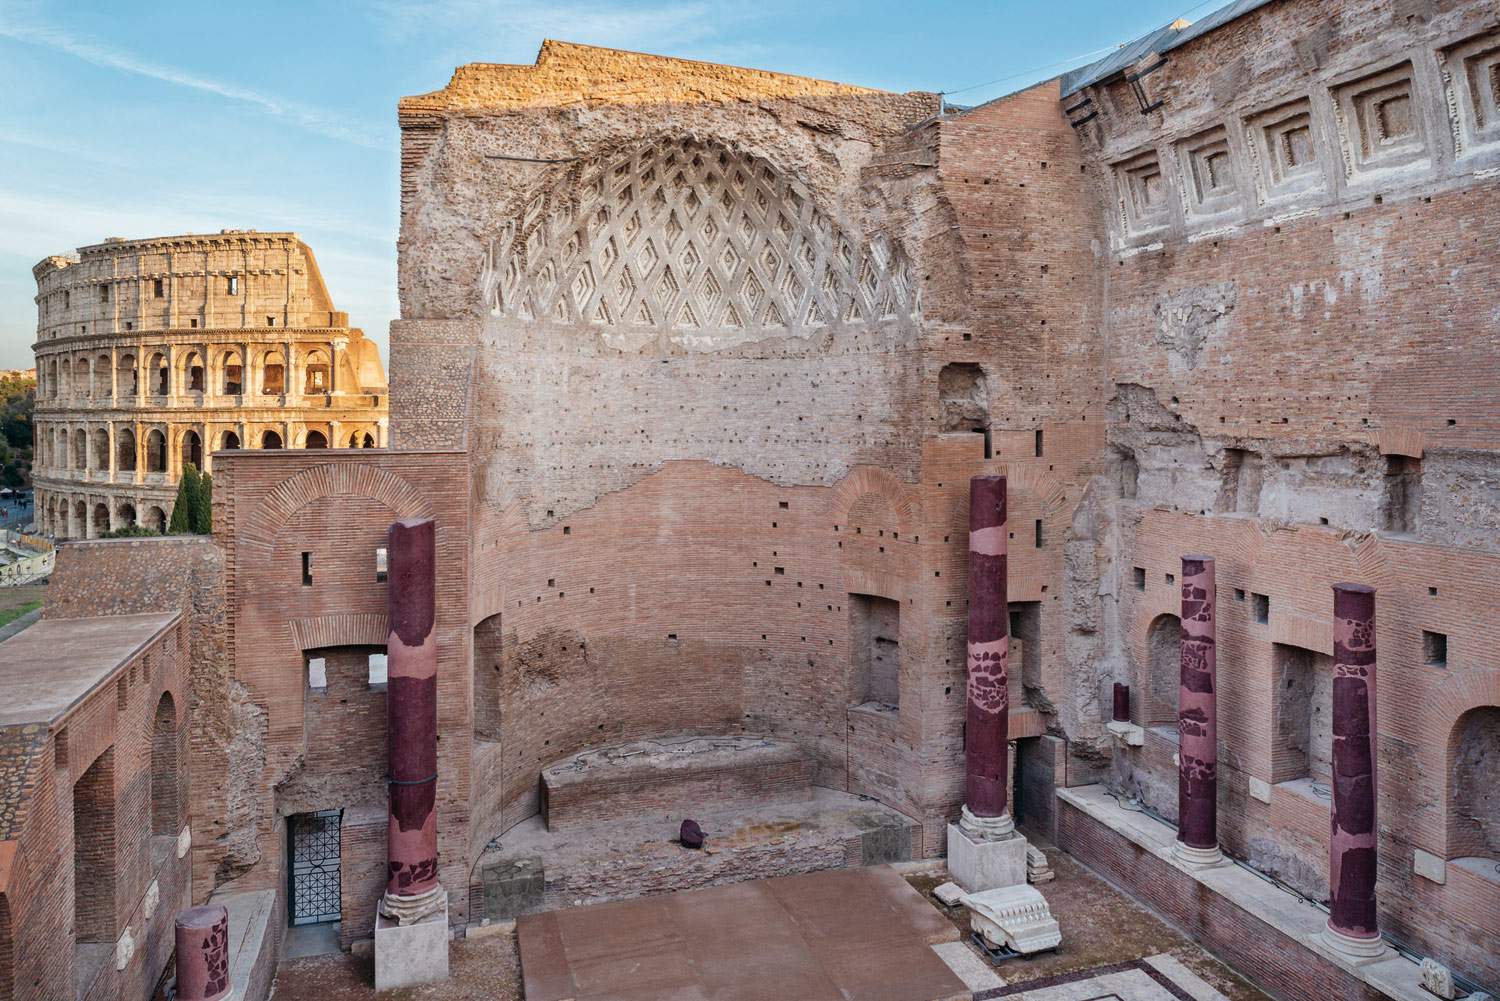 The restoration of the Temple of Venus, the largest building in ancient Rome, ends